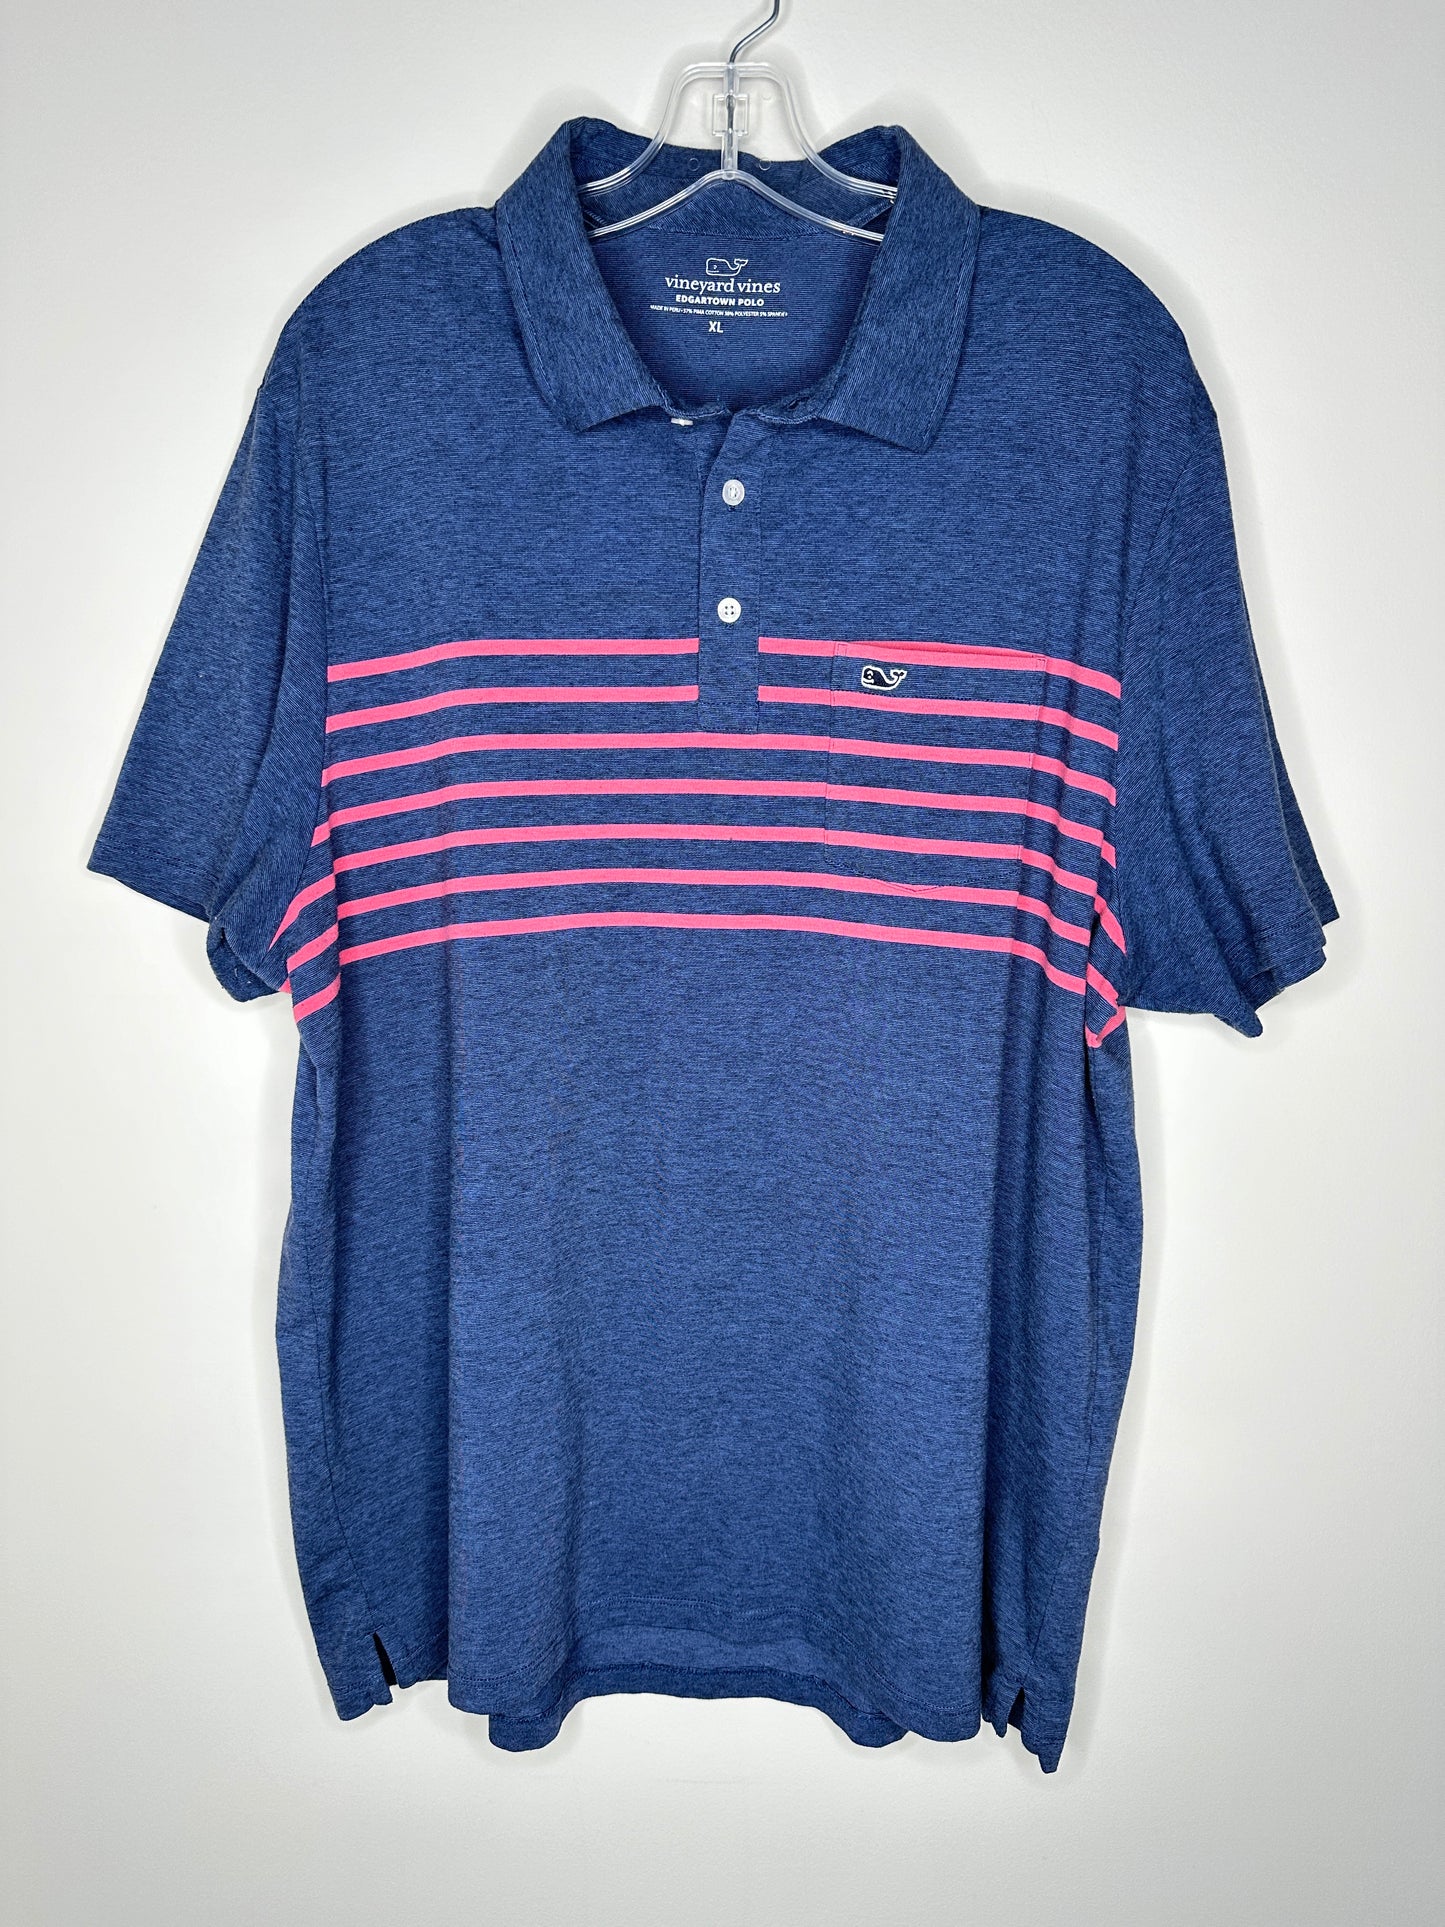 Vineyard Vines Men's Size XL Navy Blue with Red Stripes Edgartown Polo